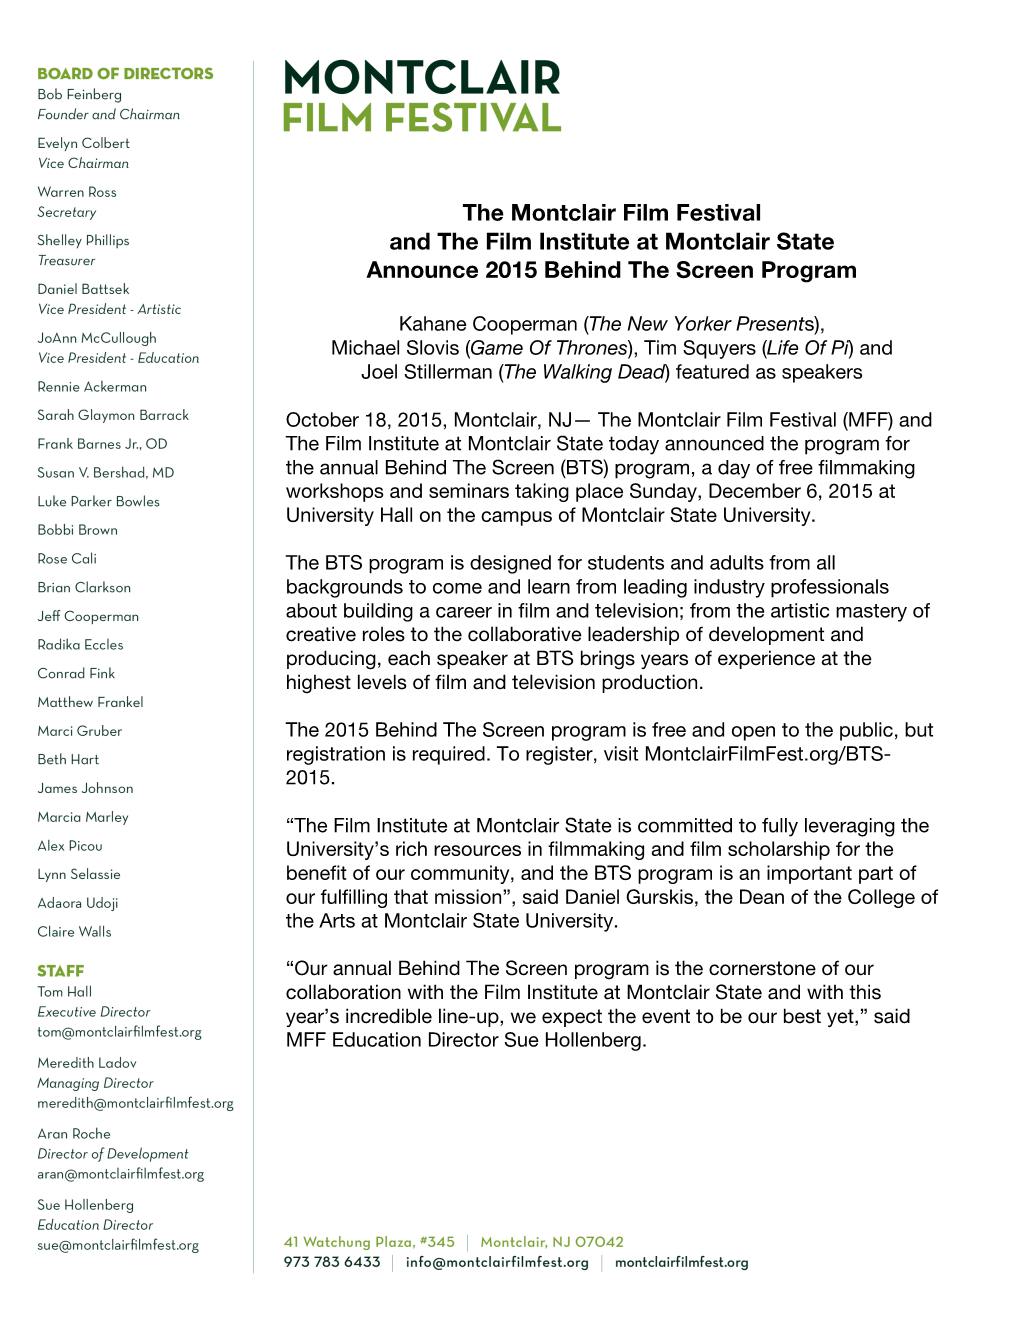 MFF and MSU Announce 2015 Behind the Screen